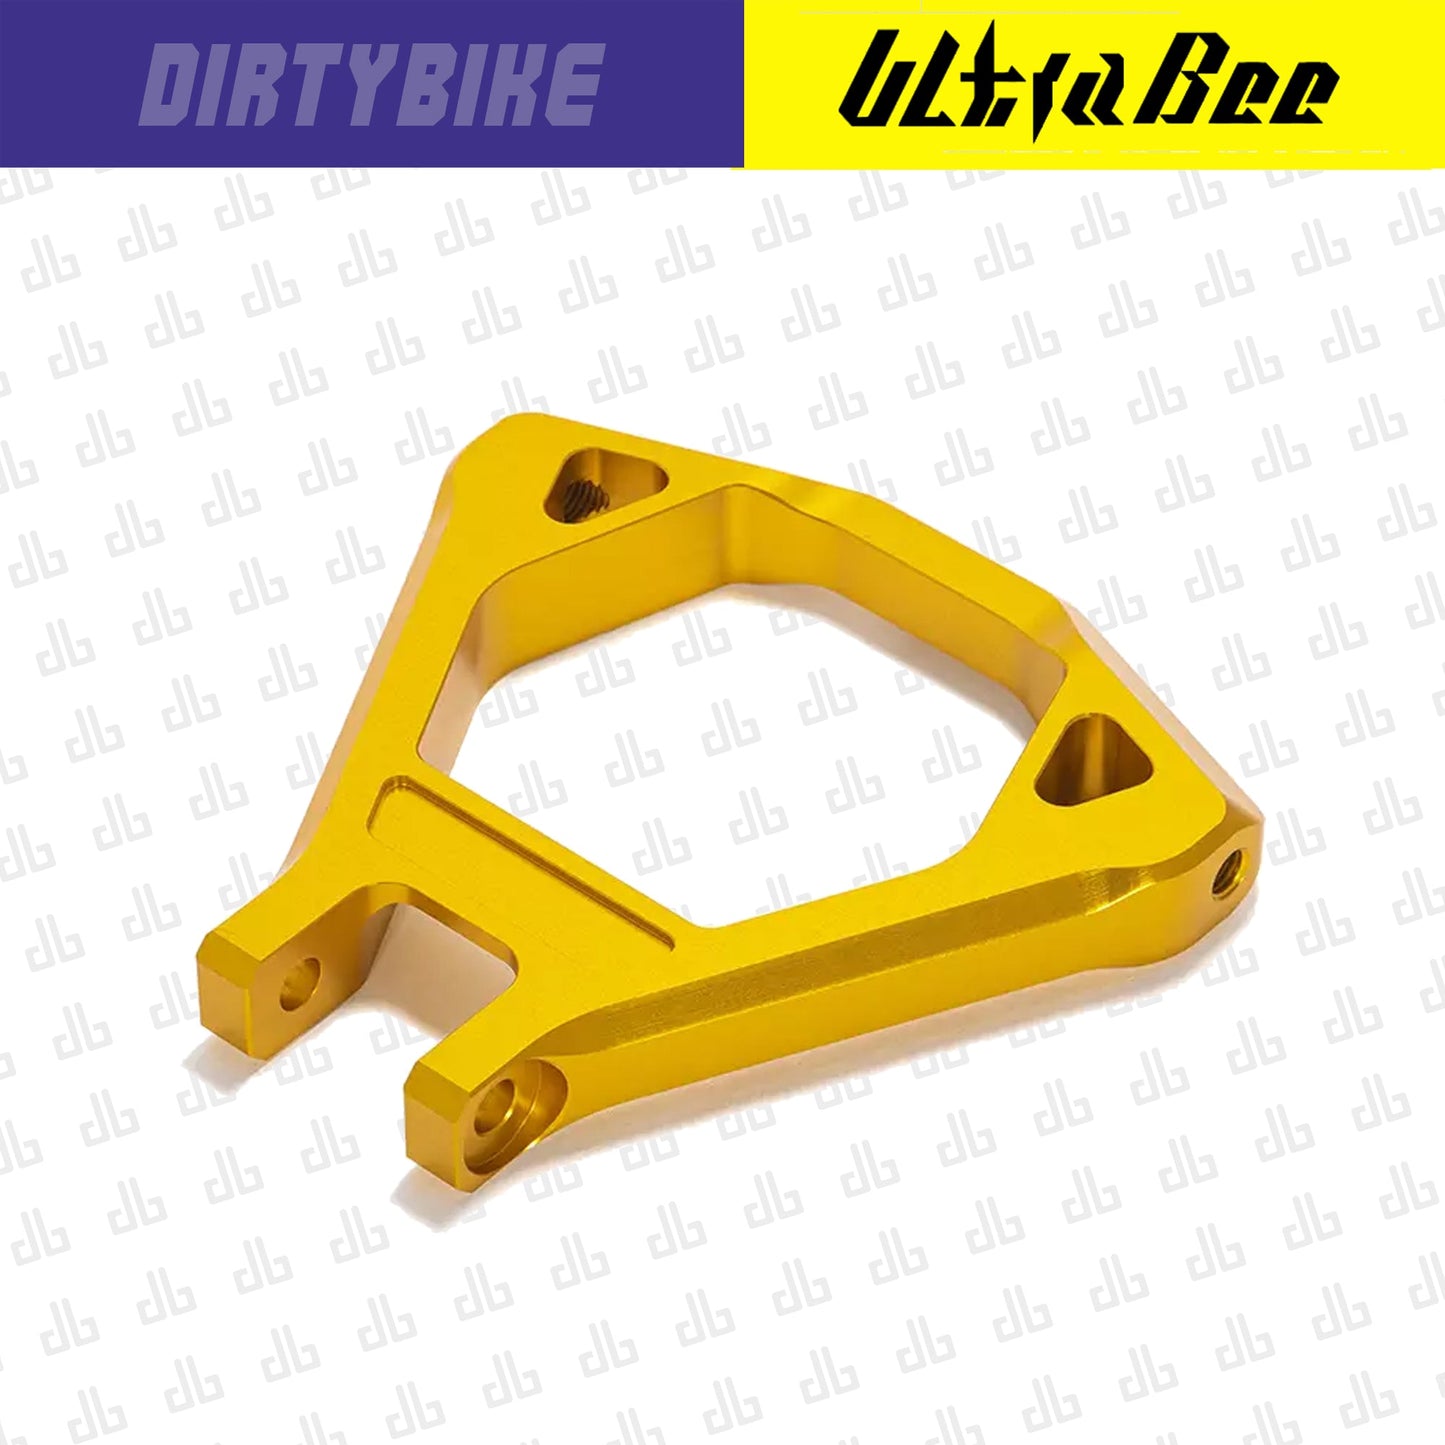 DirtyBike Aluminum Suspension Triangle for Surron Ultra Bee - REVRides